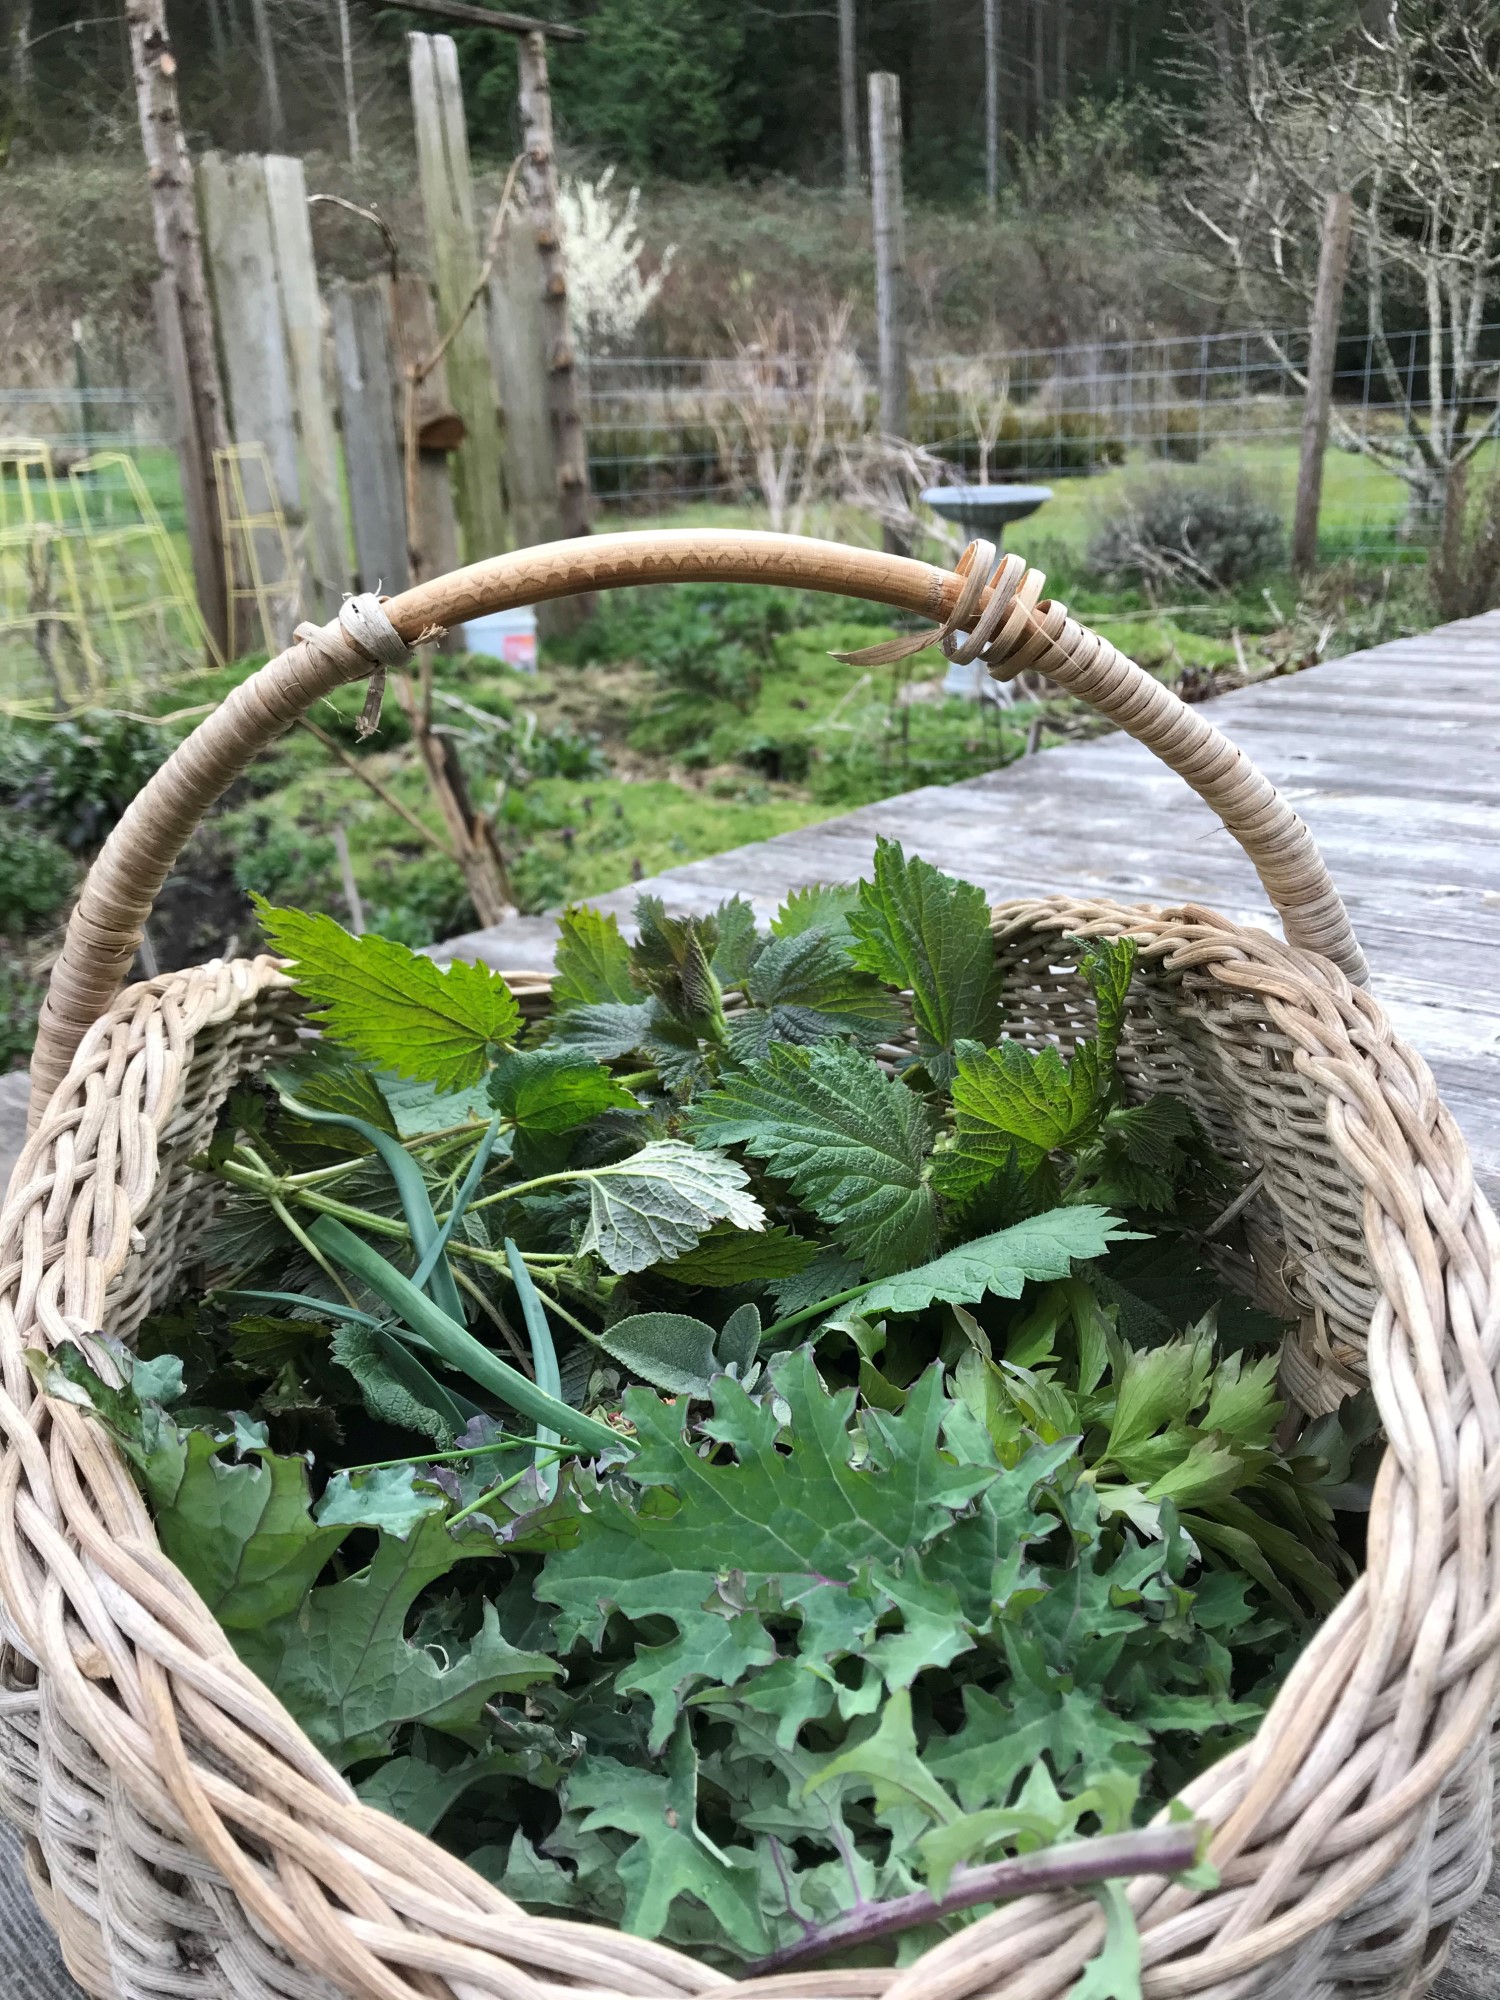 Basket full of nettles and spring greens for making soup